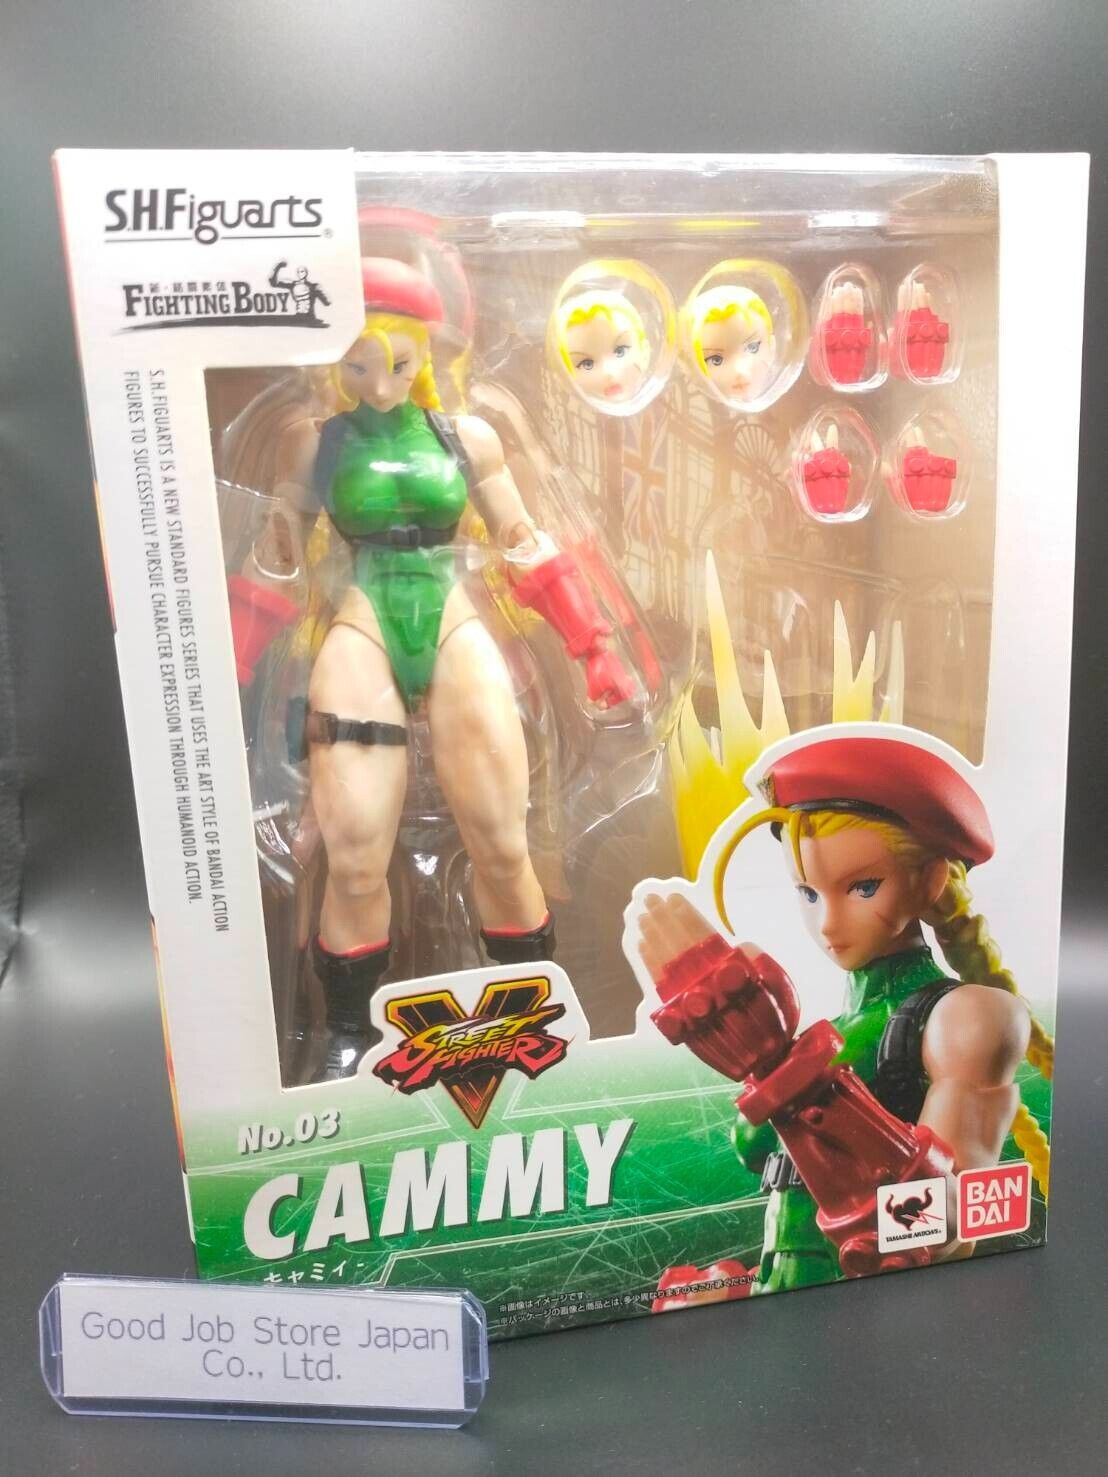 S.H.Figuarts Street Fighter Cammy Action Figure Bandai Used With Box From Jp F/S